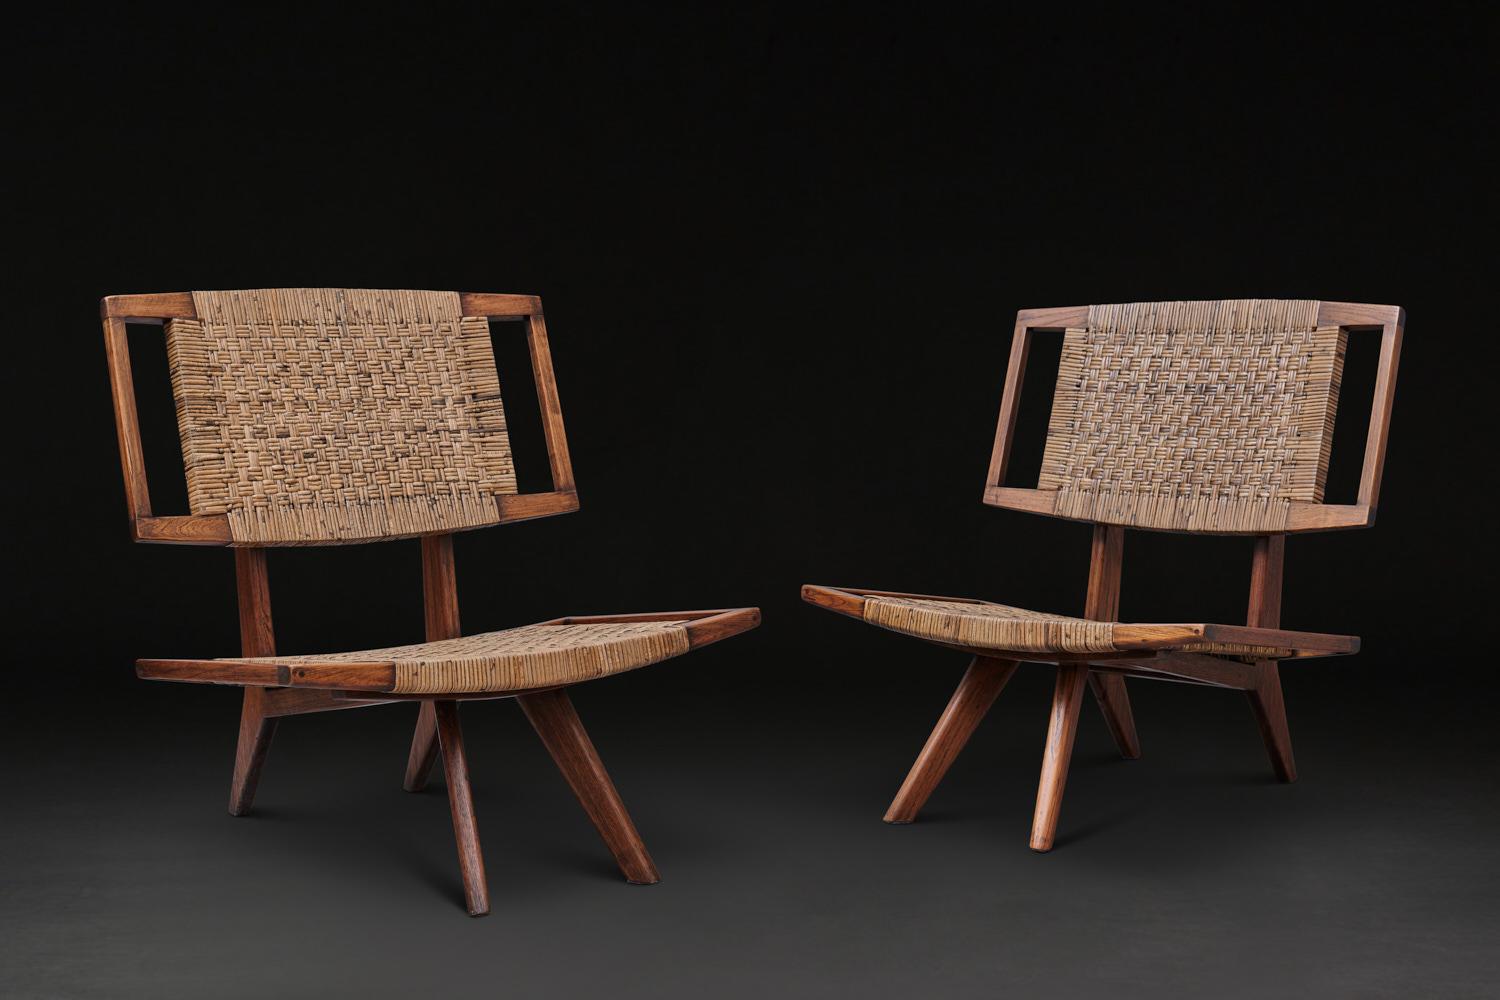 A pair of mid-century lounge chairs, attributed to Paul László Glenn of California, 1950s. The chairs are made of teak wood and woven rattan with a beautiful patina.⁠⁠
⁠⁠
Paul László was a Hungarian architect and interior designer who built his